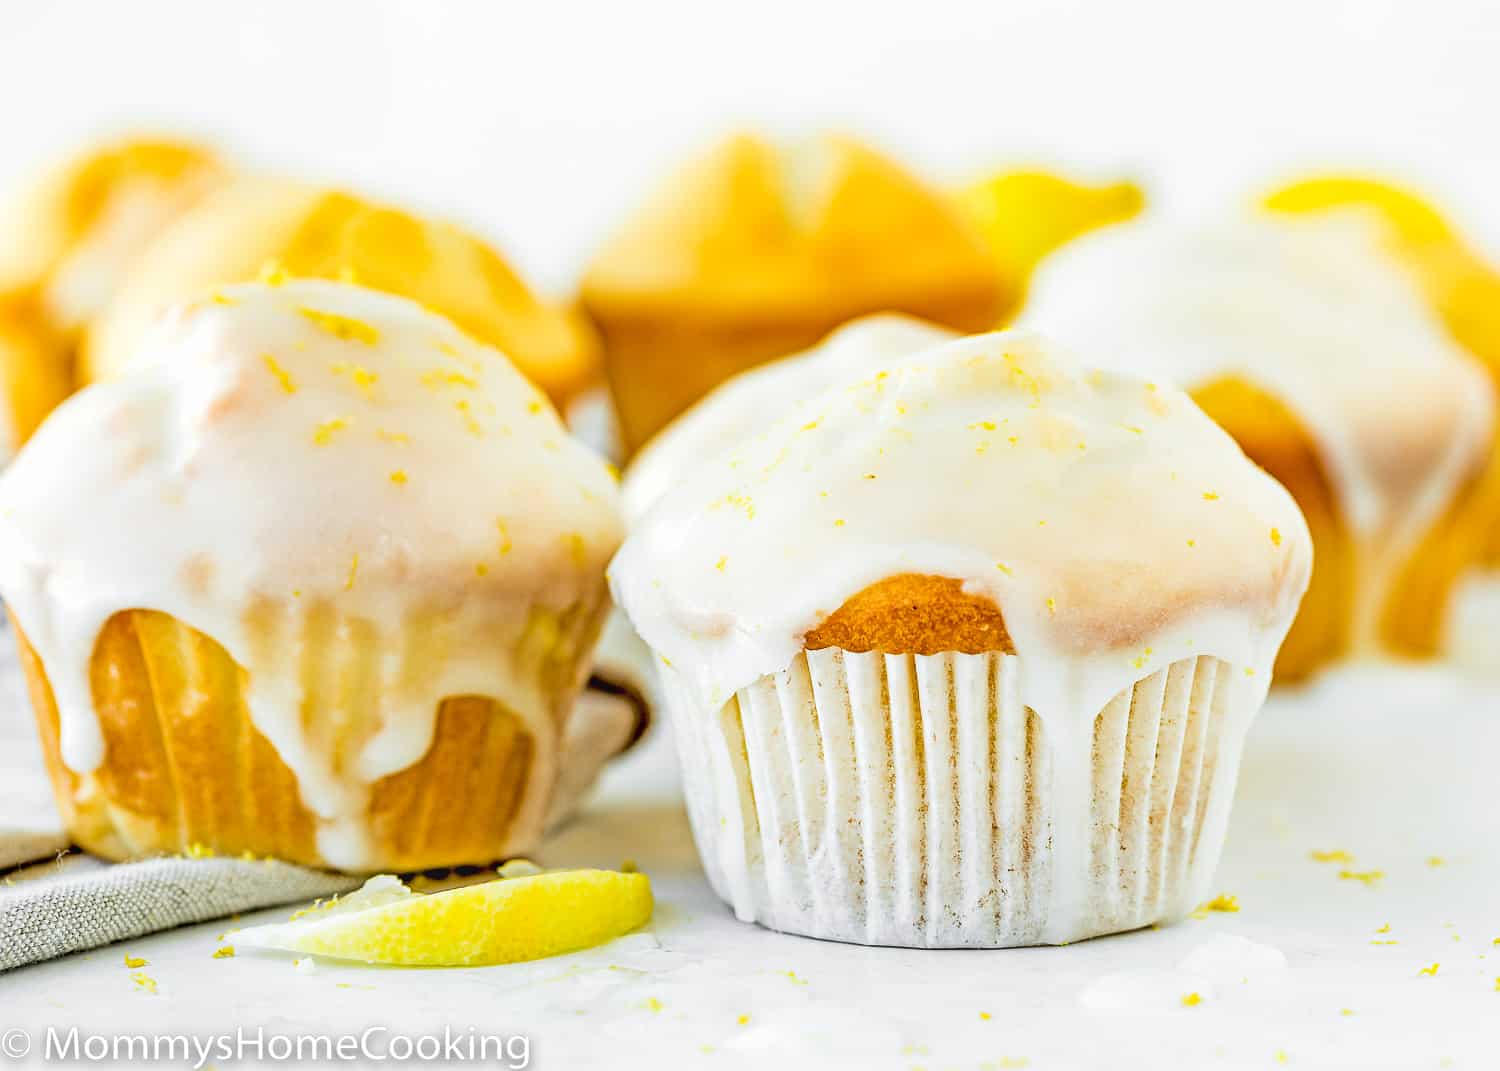 Eggless Lemon Muffins over a white surface with a lemon slice on the side.